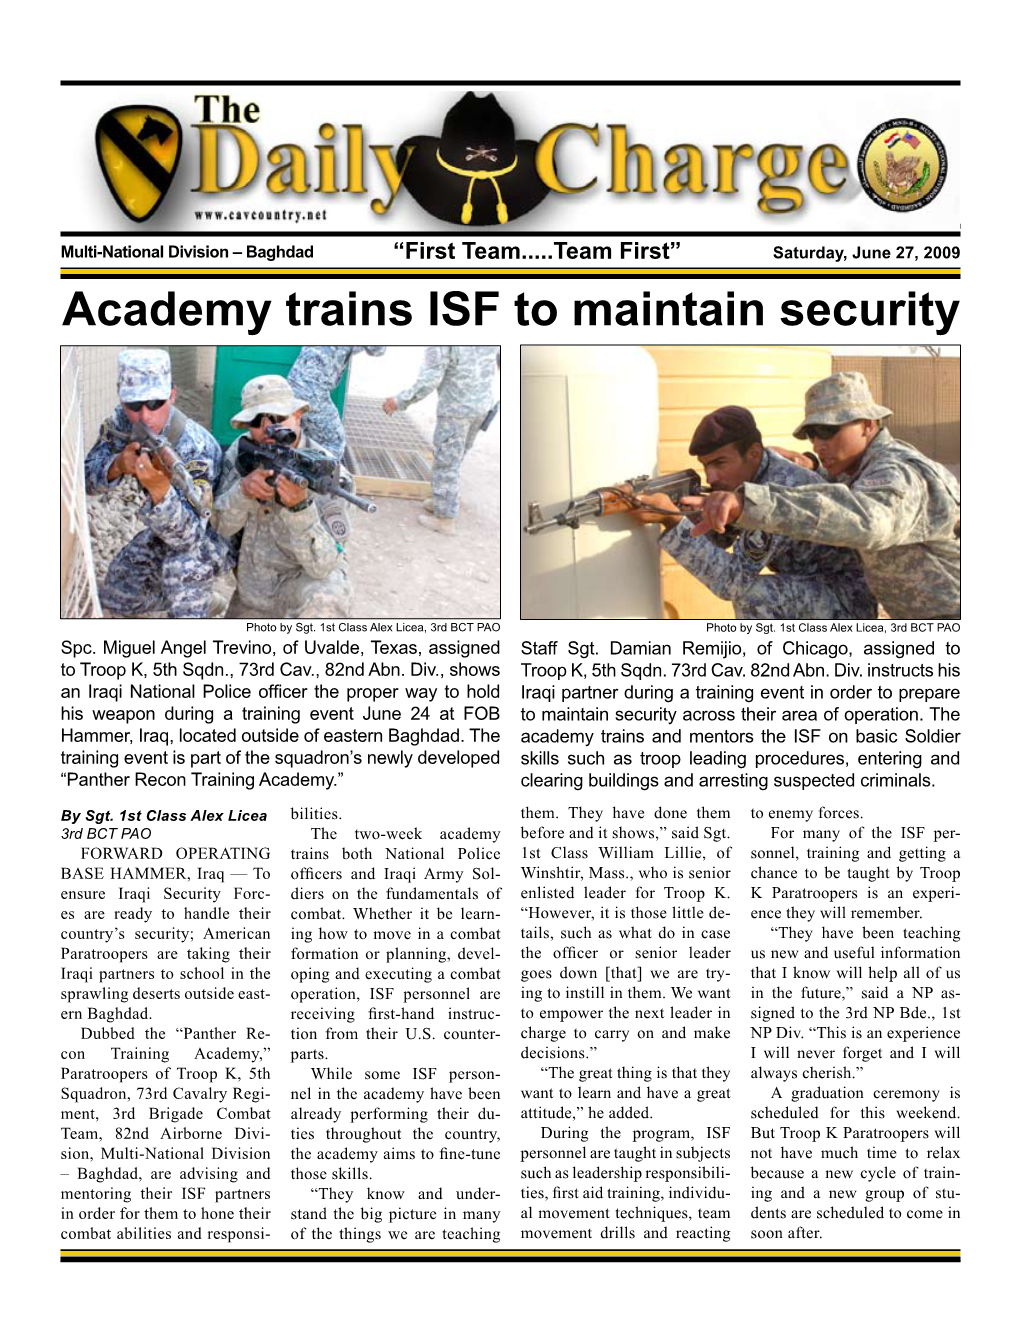 Academy Trains ISF to Maintain Security